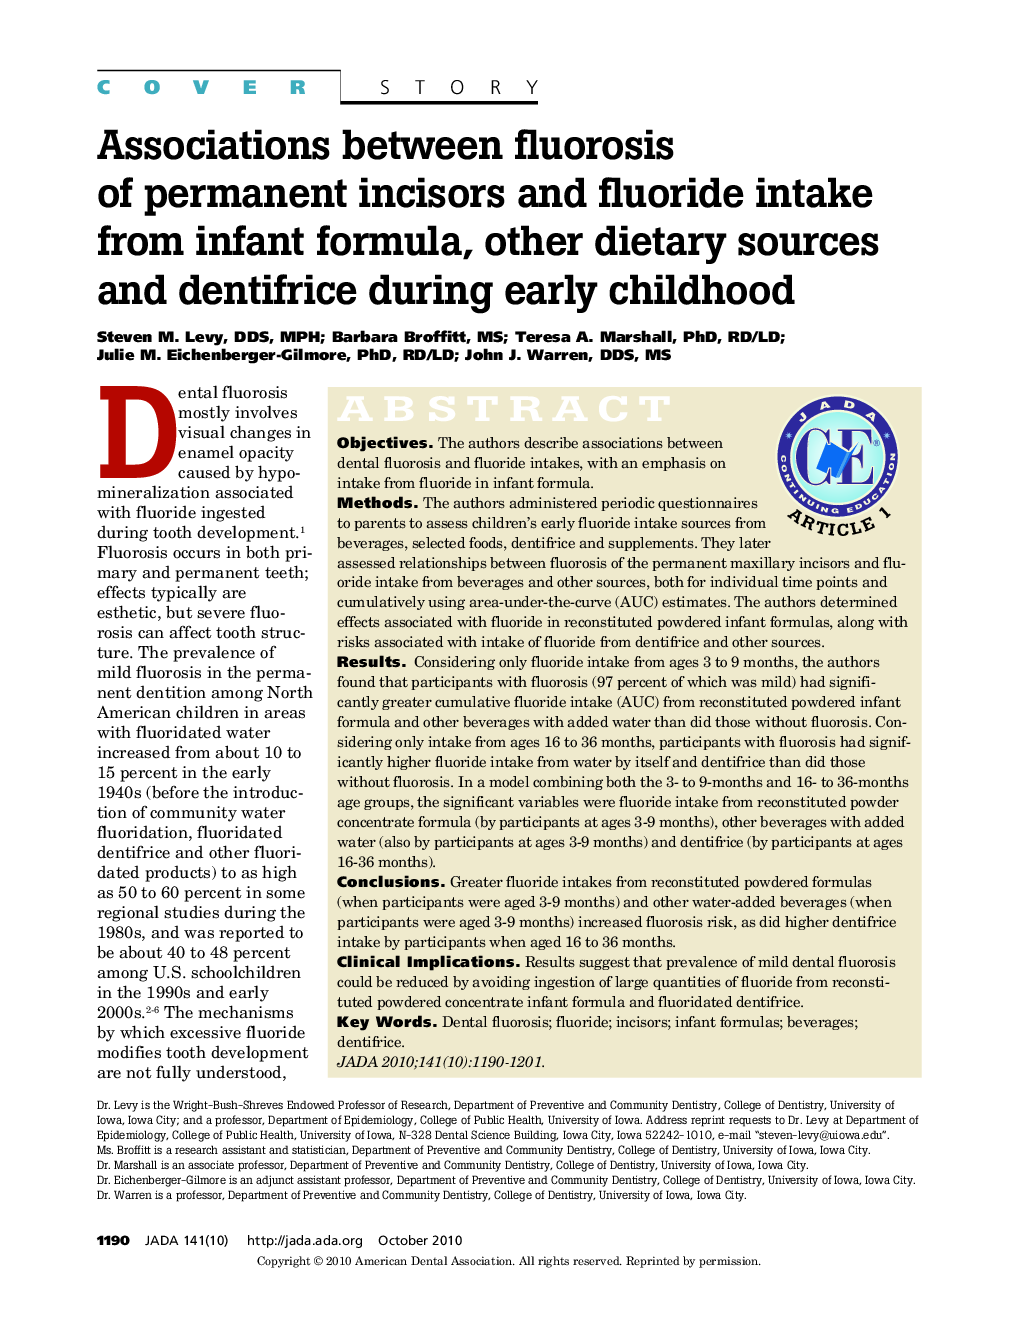 Associations Between Fluorosis of Permanent Incisors and Fluoride Intake From Infant Formula, Other Dietary Sources and Dentifrice During Early Childhood 